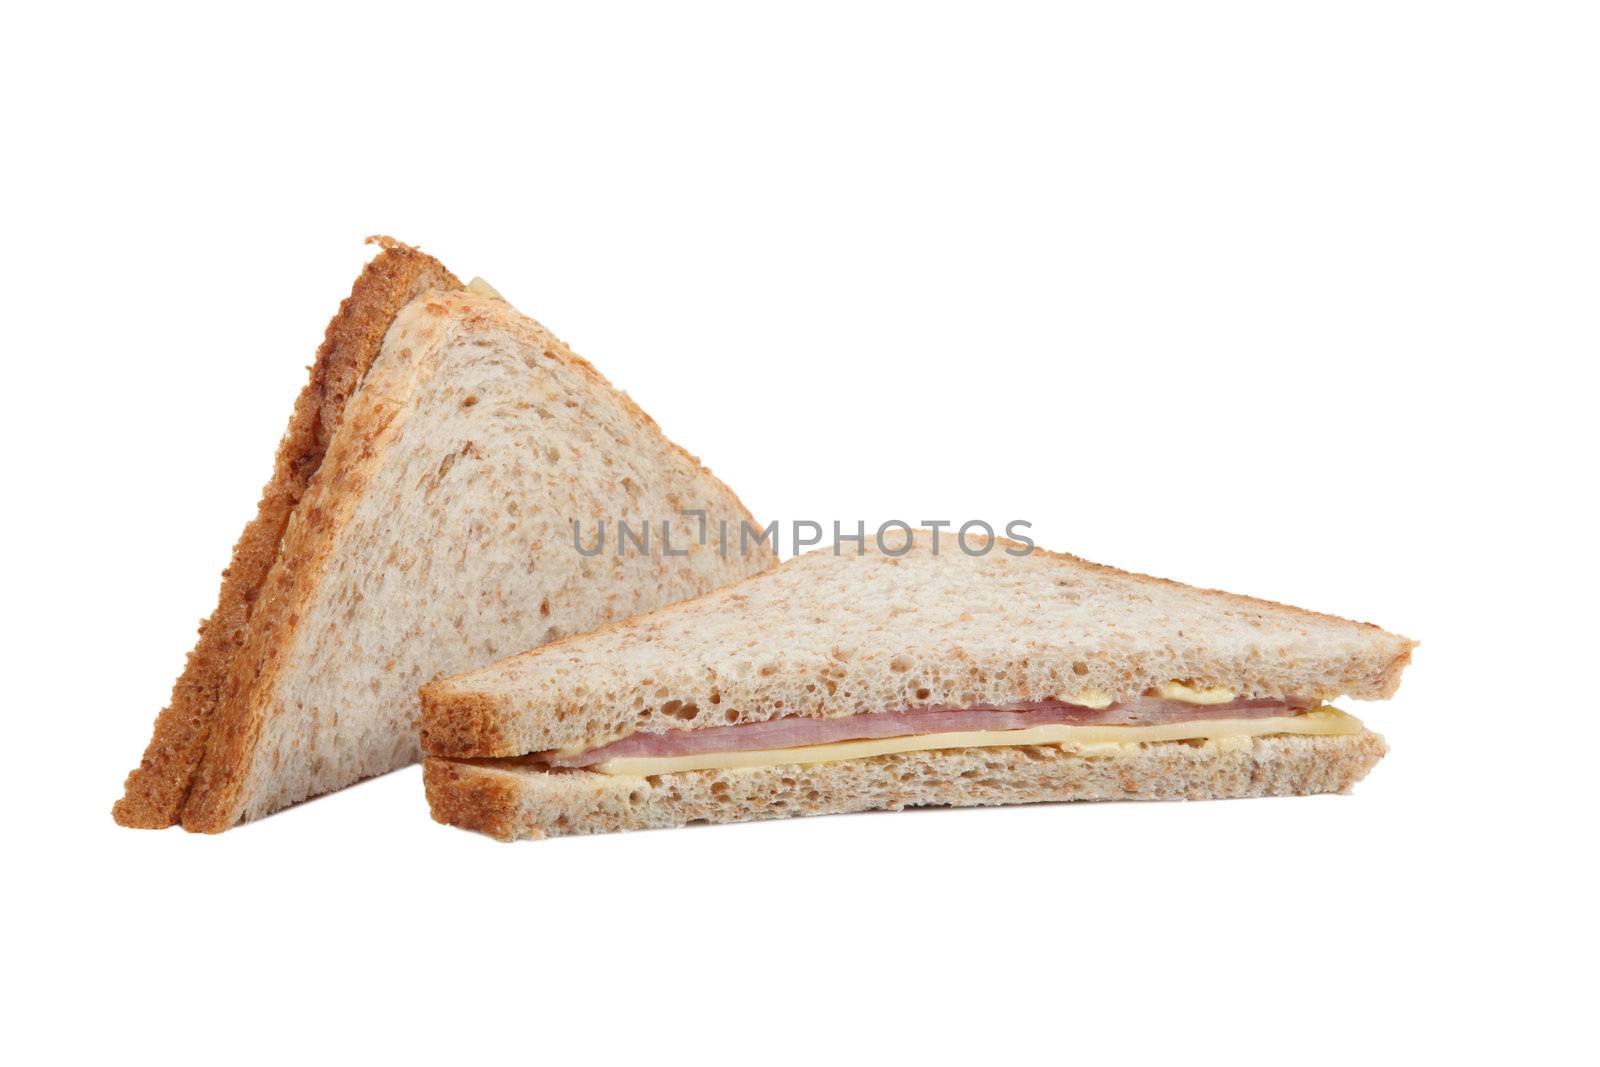 Ham and cheese sandwich by phovoir